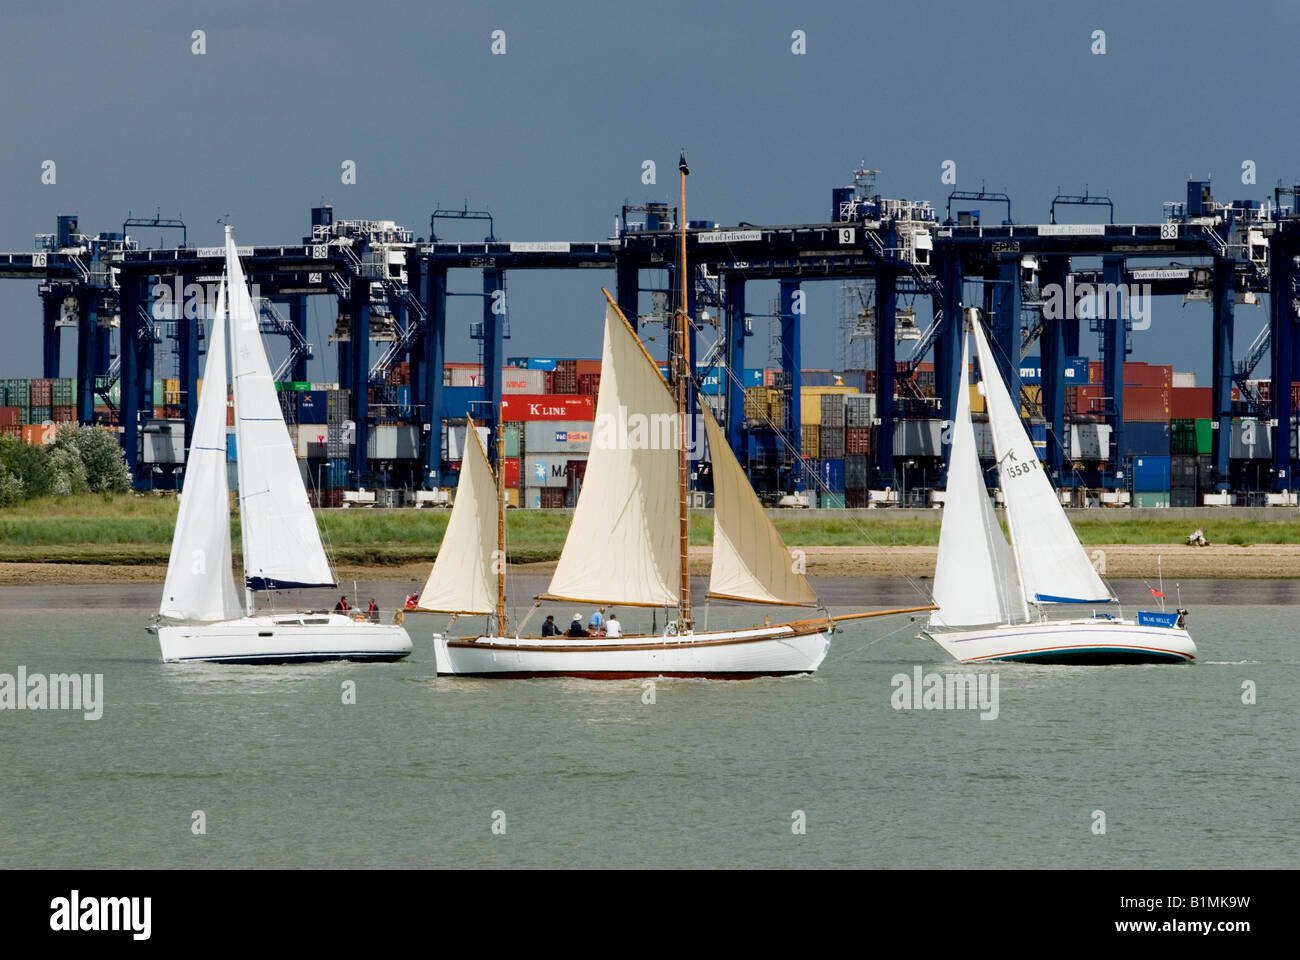 Sailing boats on the river Orwell near the Port of Felixstowe, Suffolk, UK. Stock Photo